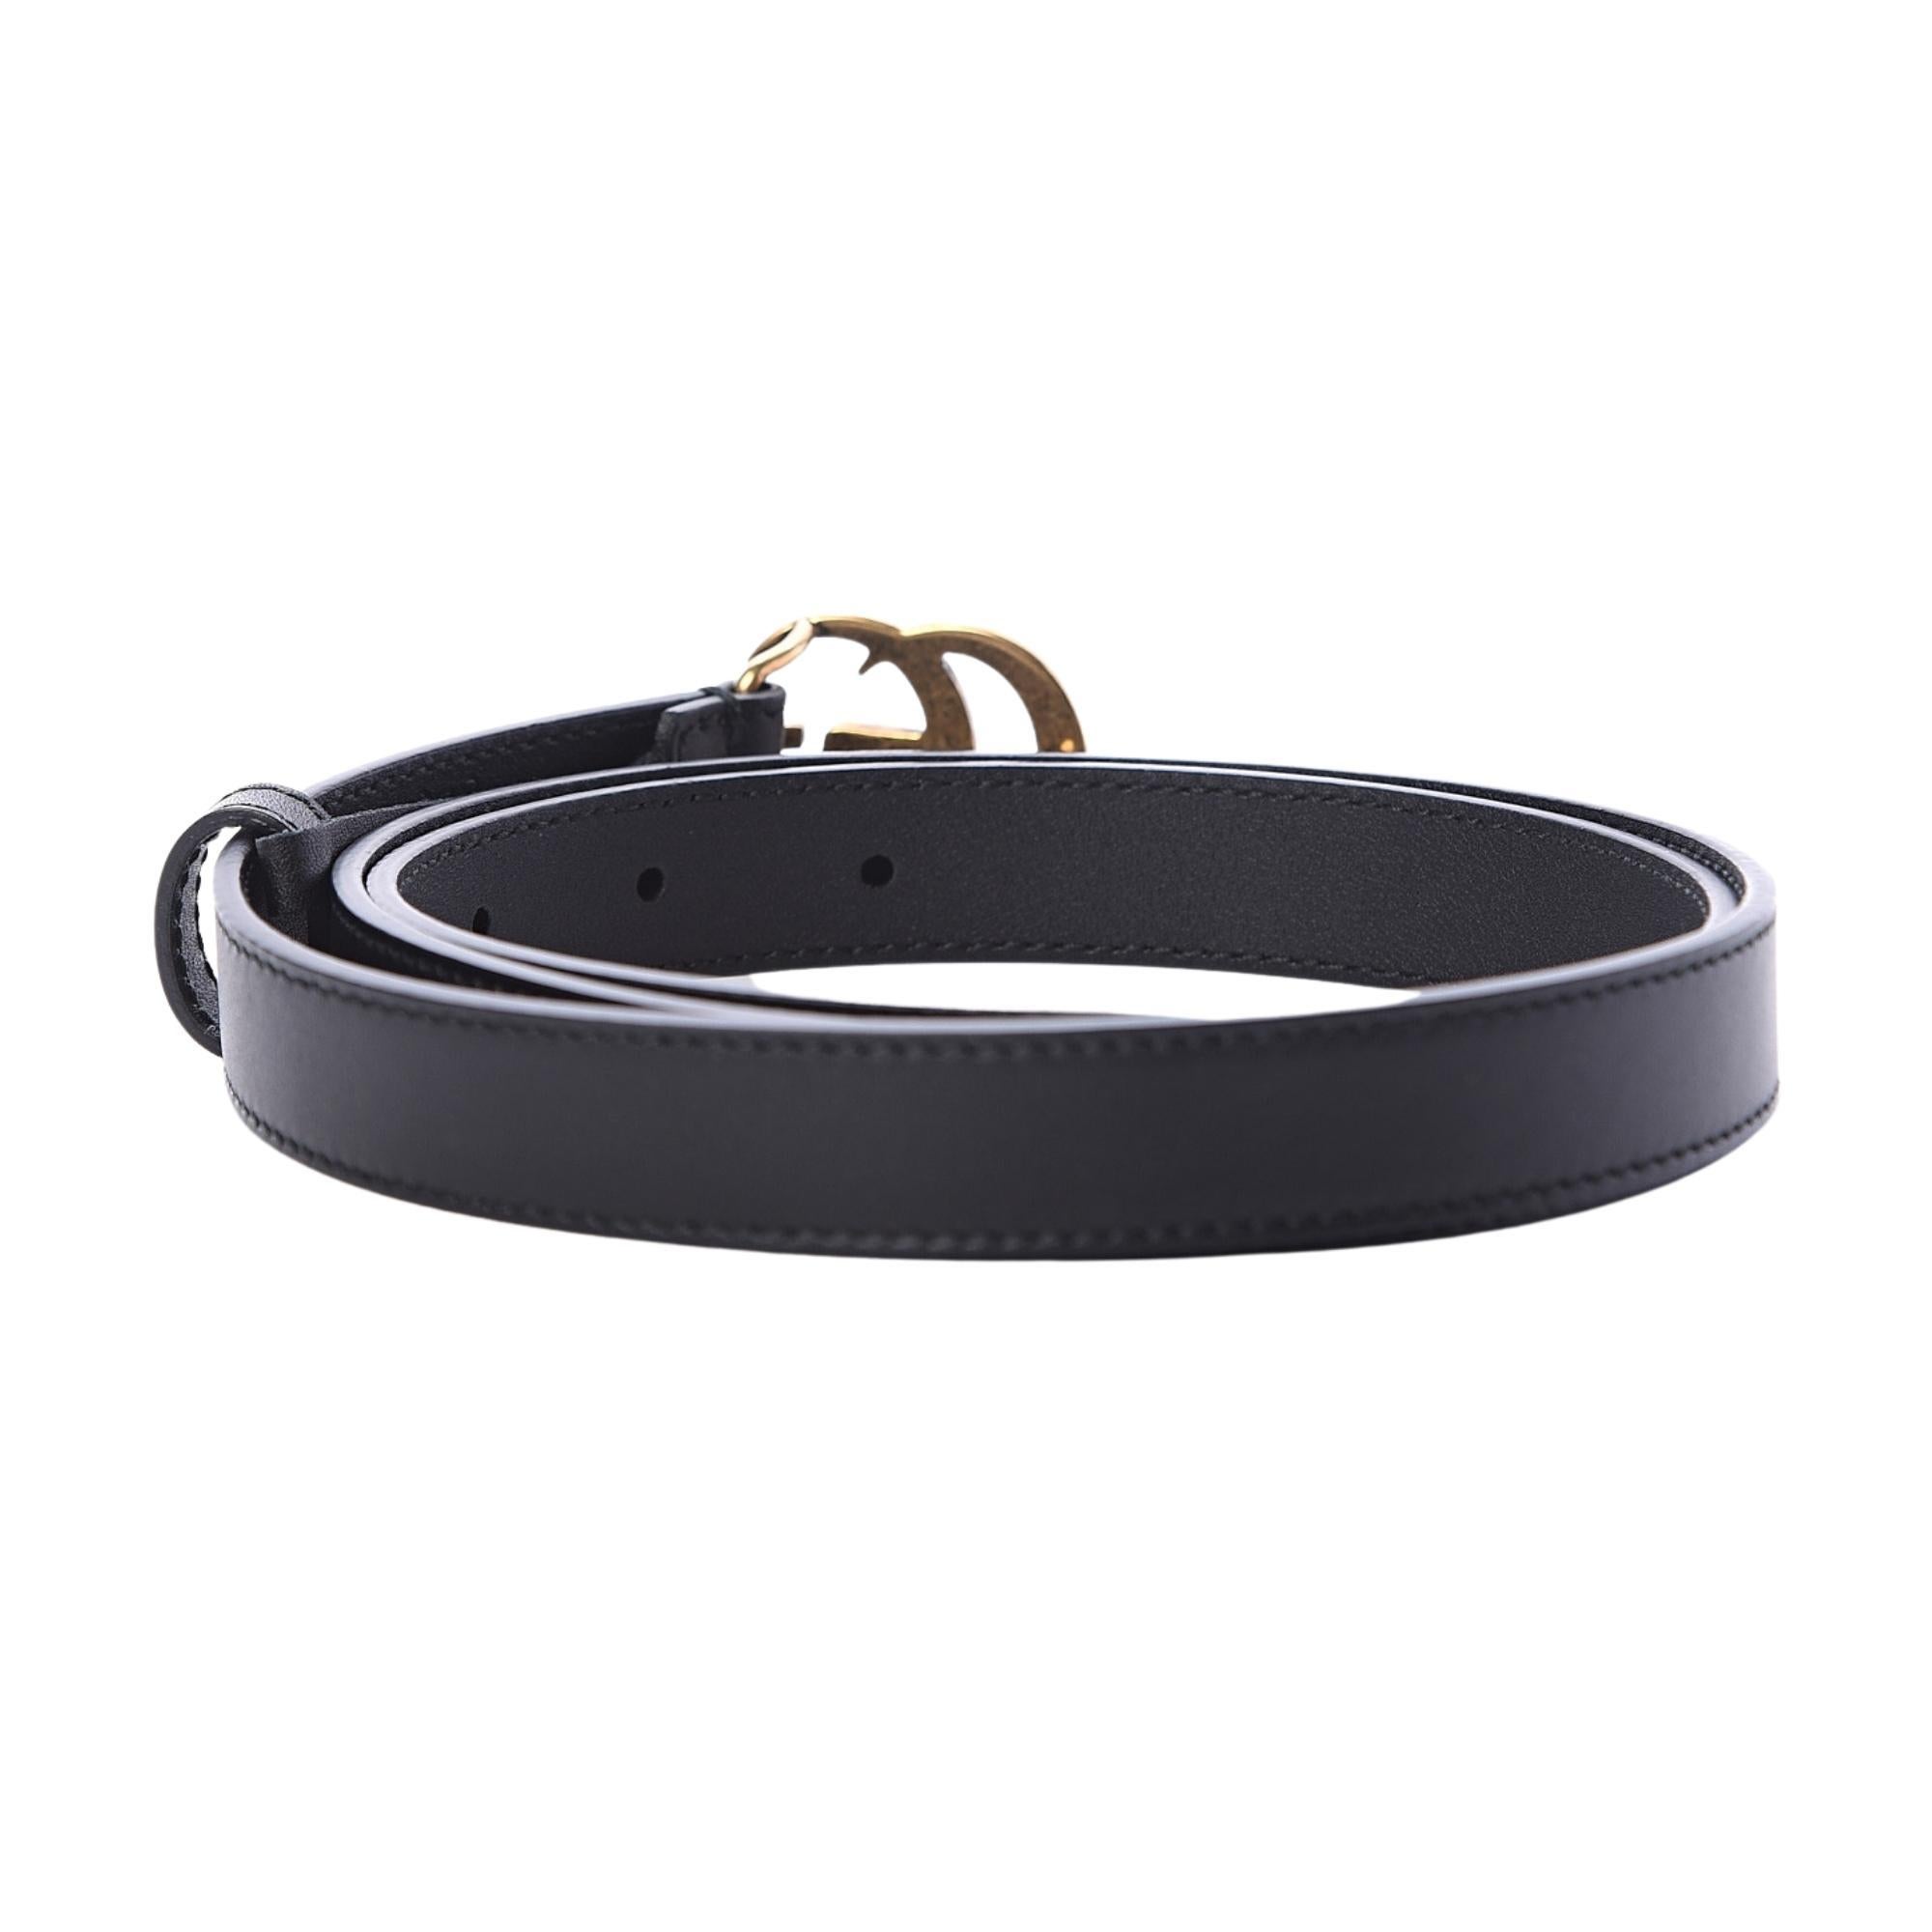 This belt is made of black calfskin leather and features the the signature GG buckle in aged gold tone.

COLOR: Black
MATERIAL: Calf leather
ITEM CODE: 409417
SIZE: 85 cm / 34 in
COMES WITH: Dust bag and box
CONDITION: New

Made in Italy